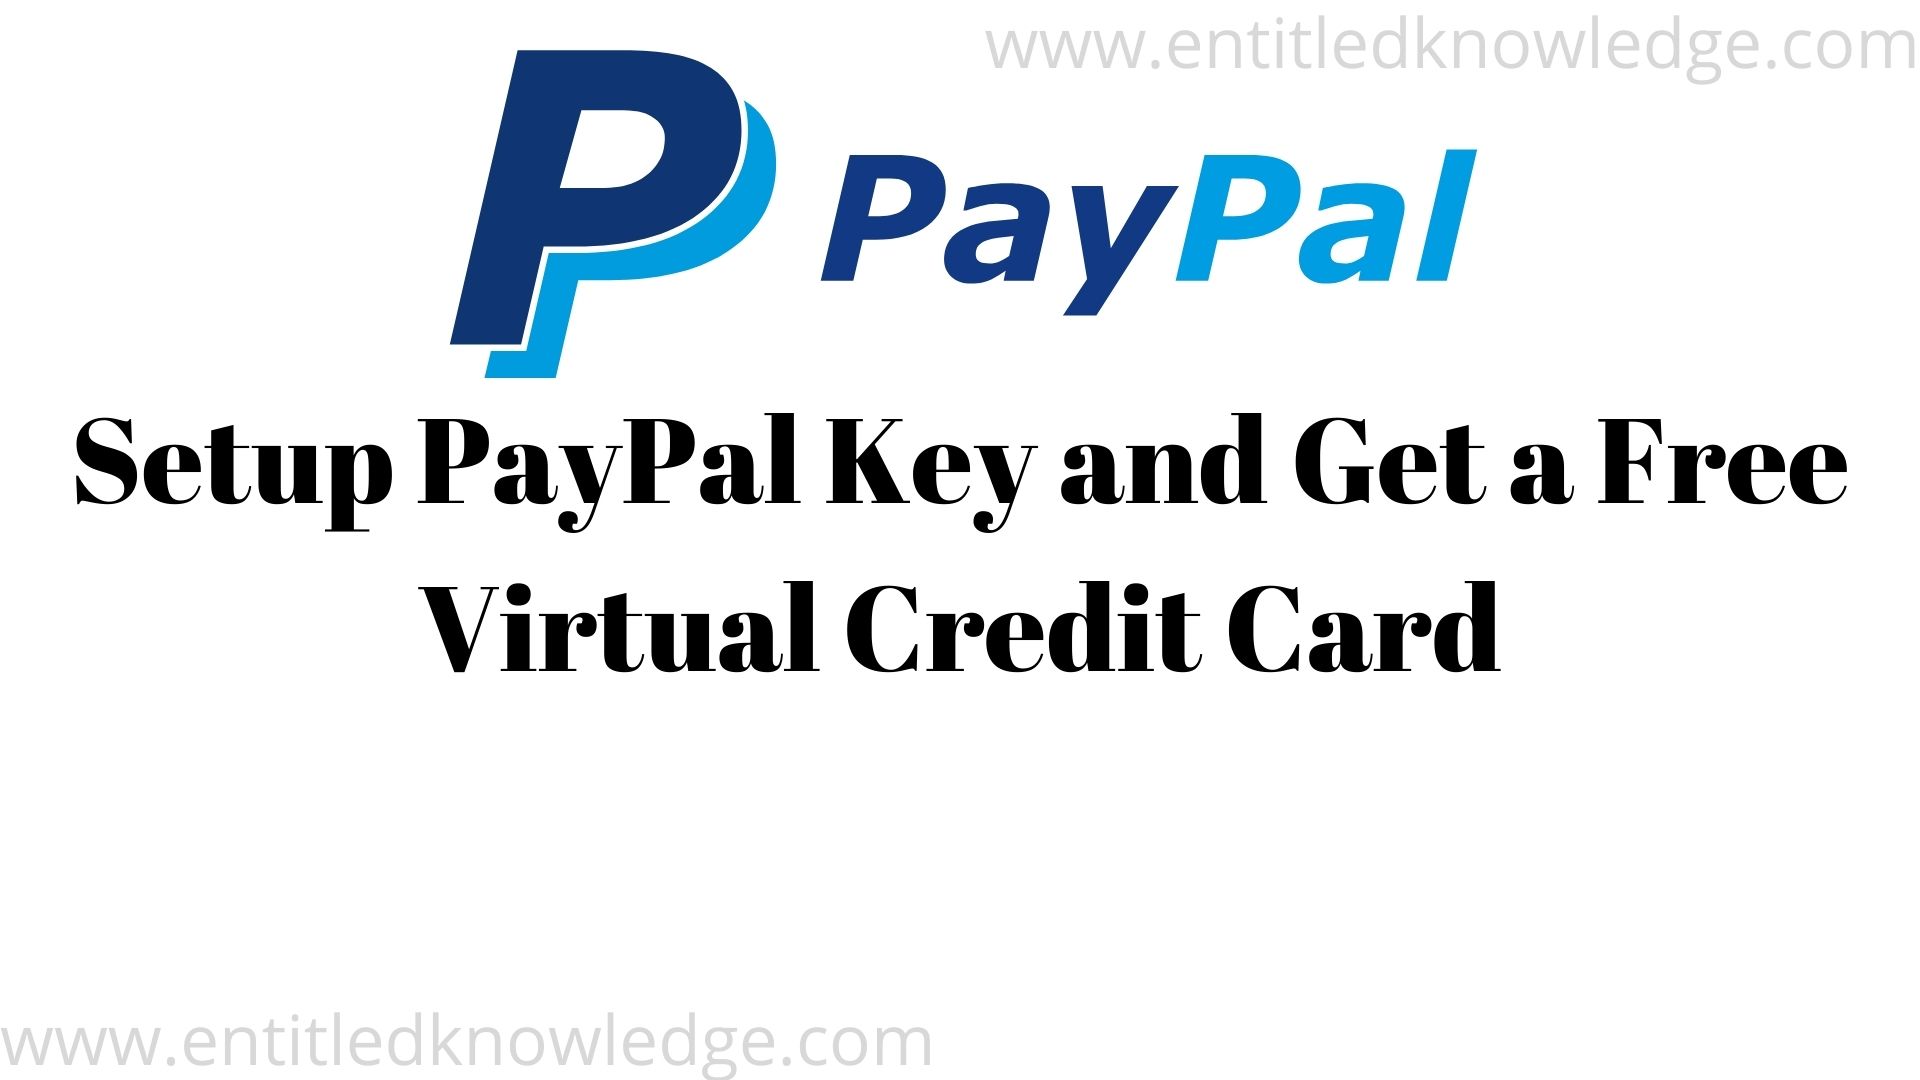 How to Setup PayPal Key and Get a Free Virtual Credit Card